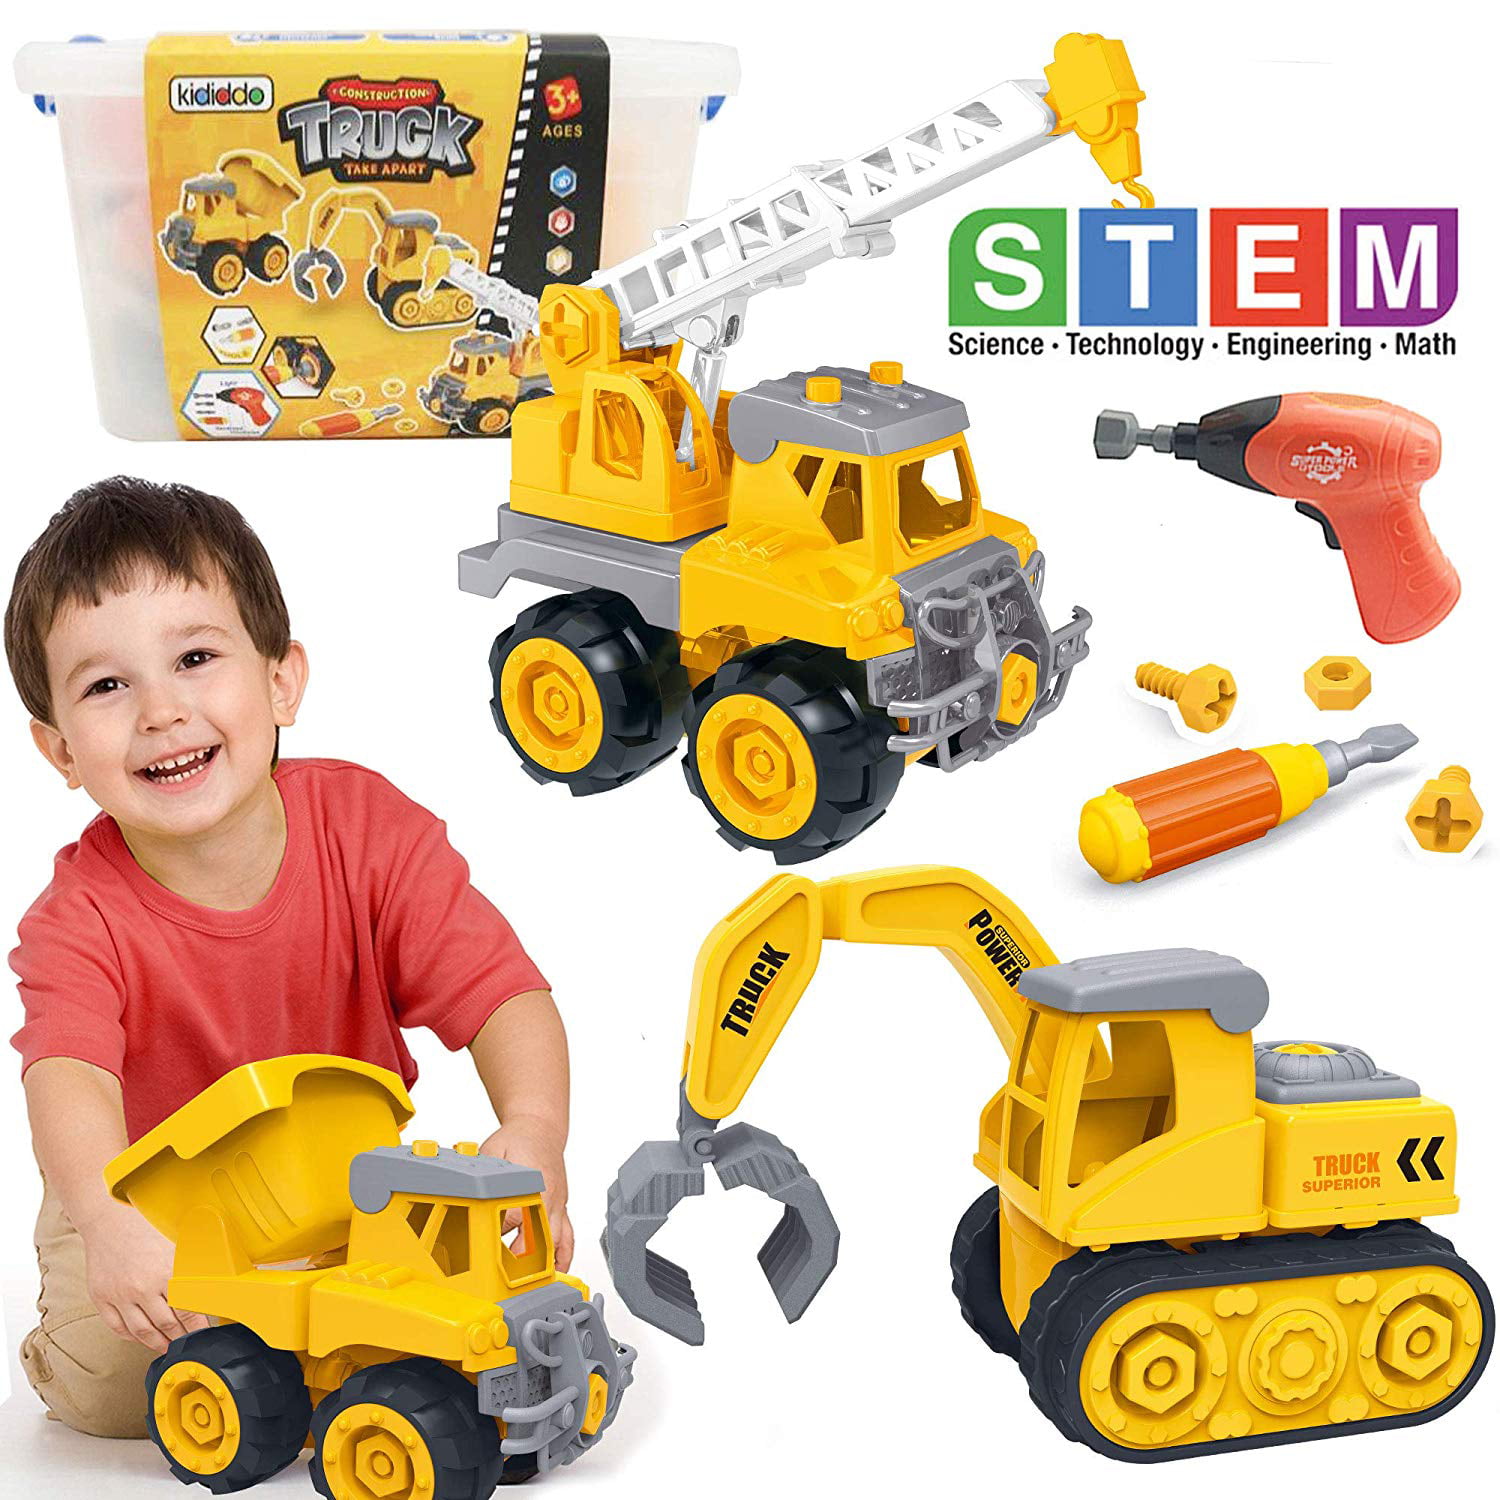 Take Apart Vehicle Toys with Tools Learning Construction Play Set for Toddlers 